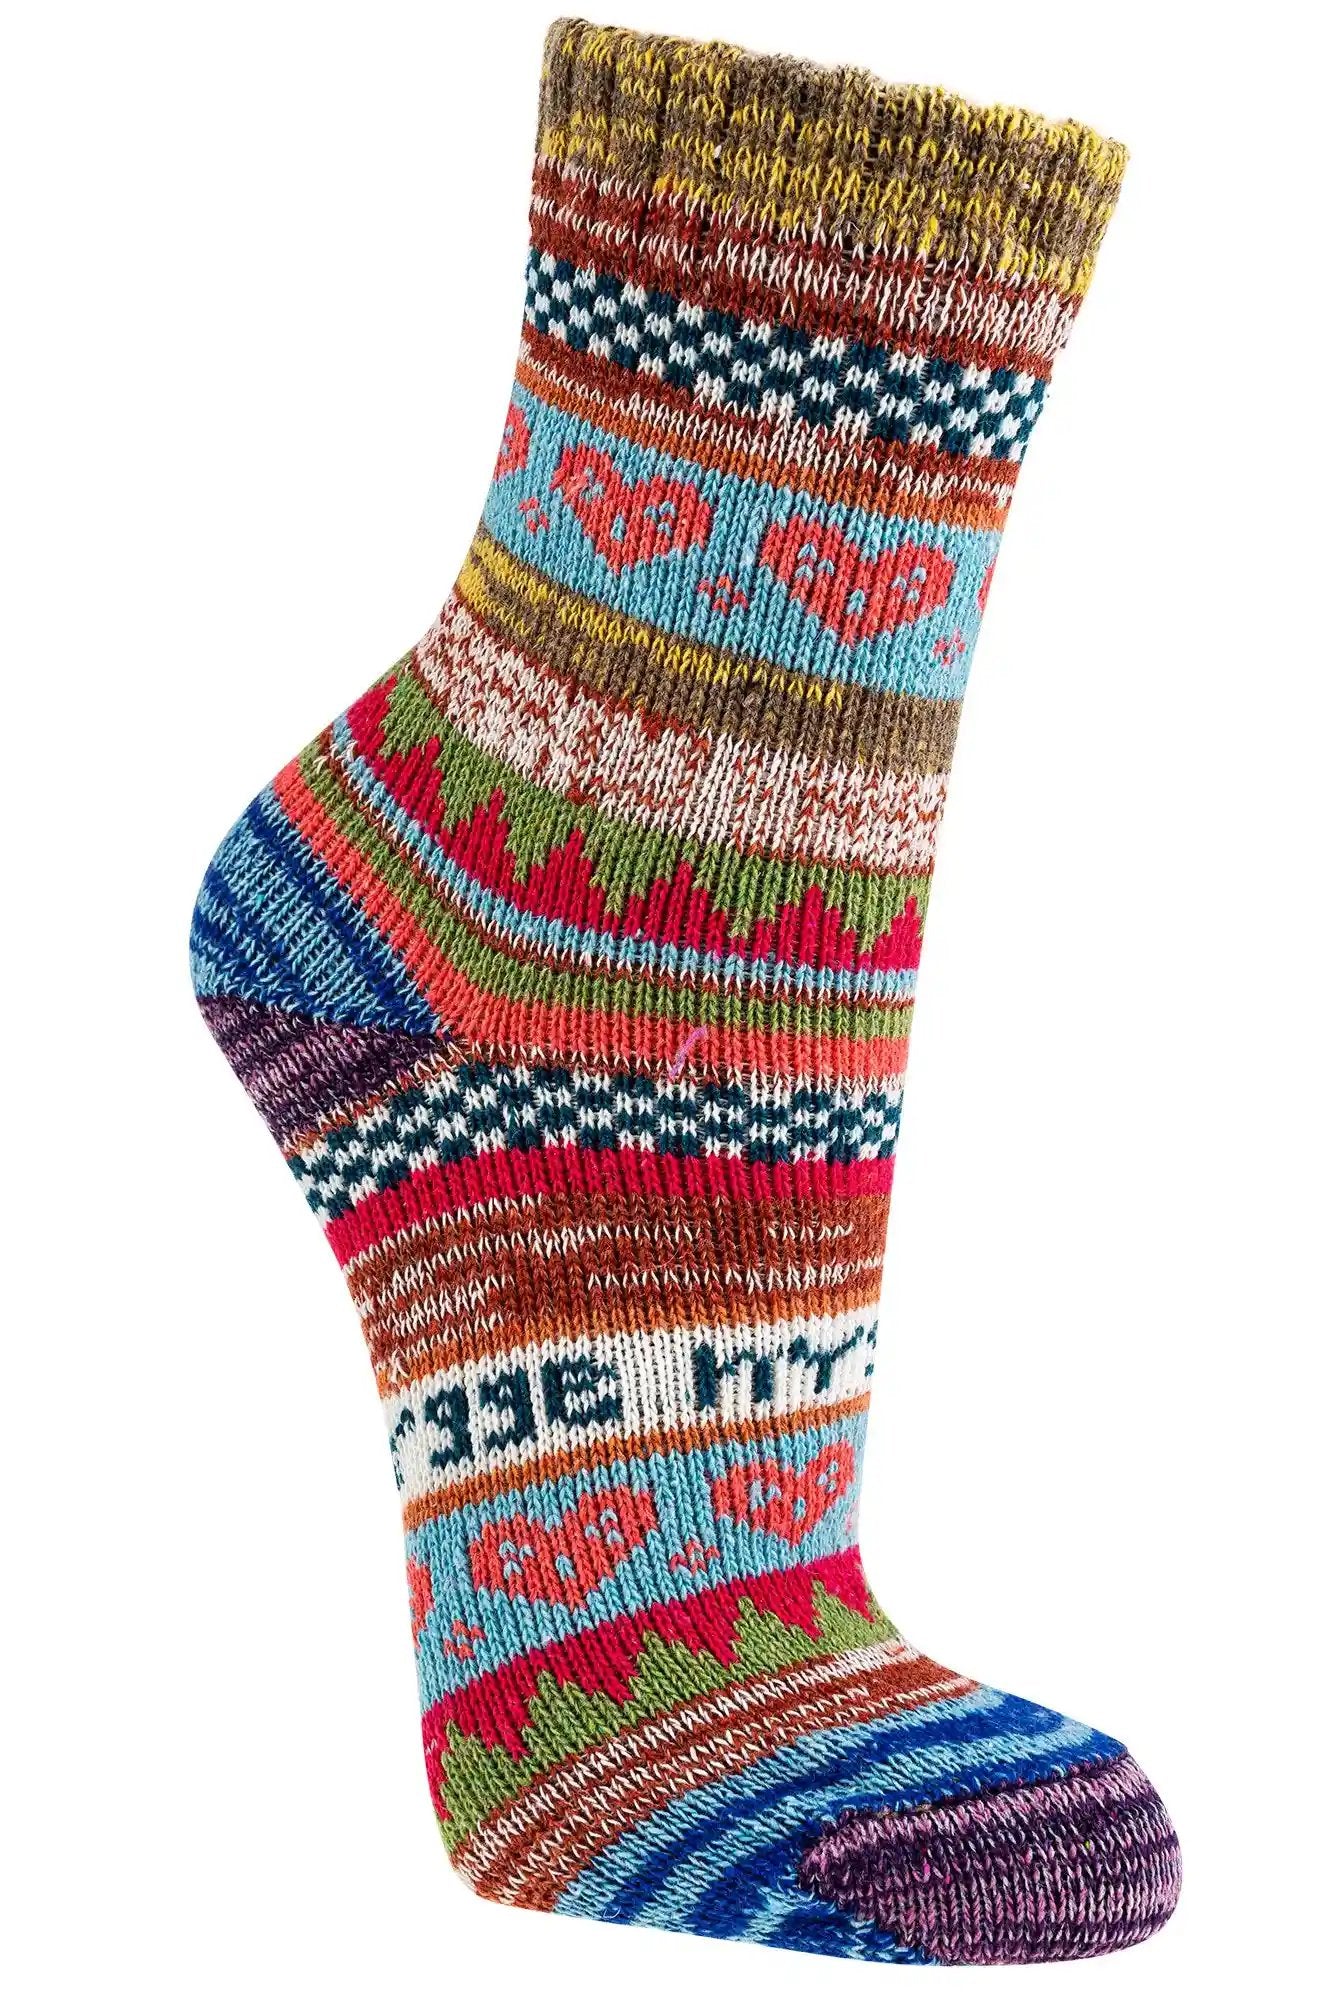 3 pairs of colorful hygge Norwegian socks cotton with a beautiful pattern for children and baby